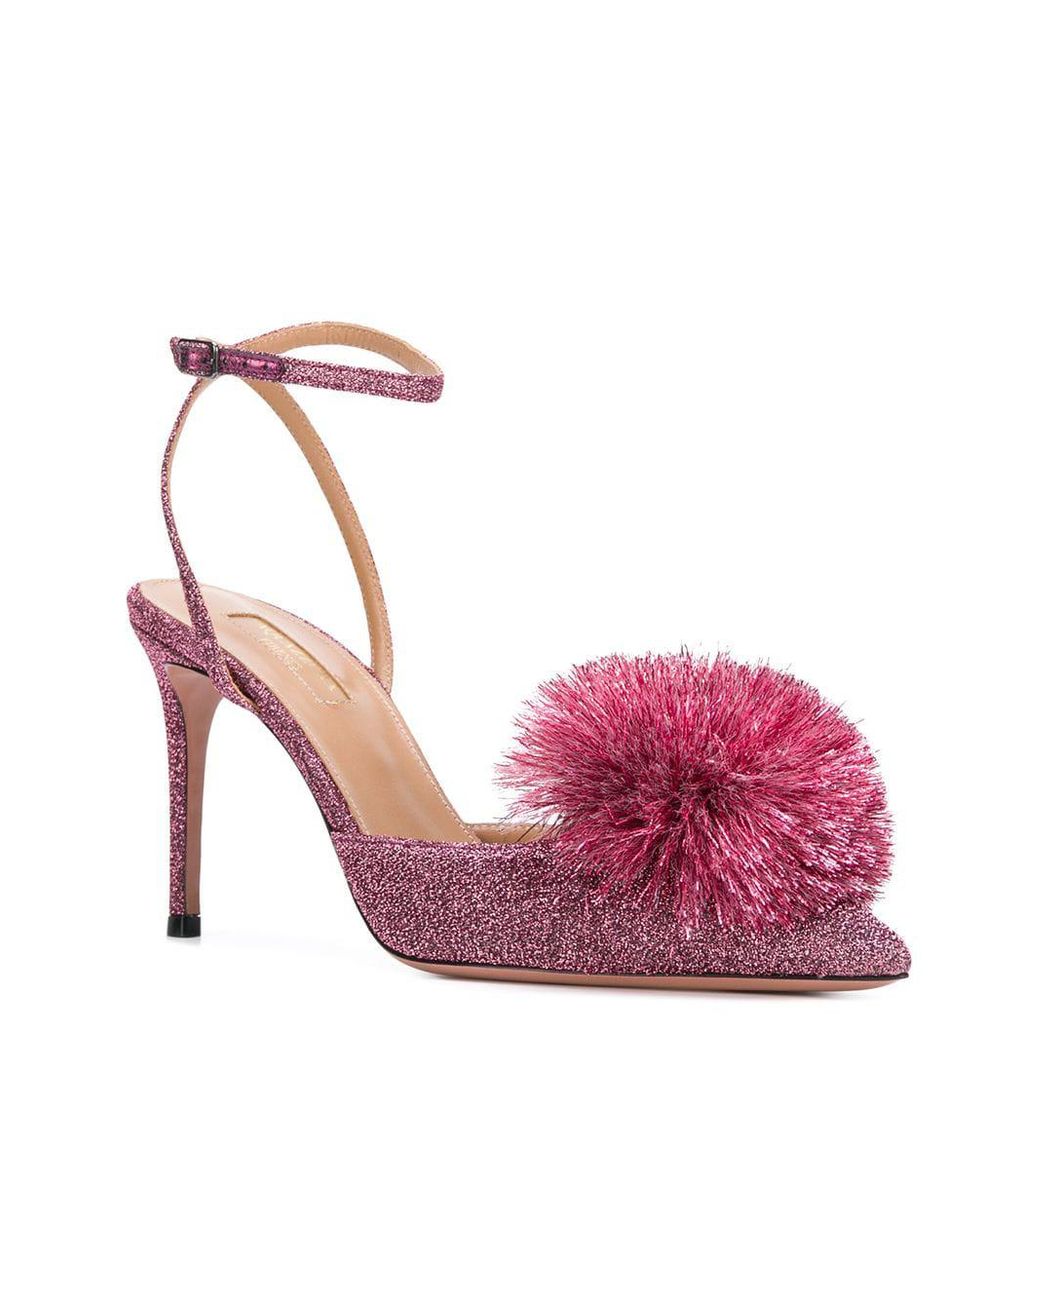 Aquazzura Pointed Pompom Sandals in Pink | Lyst